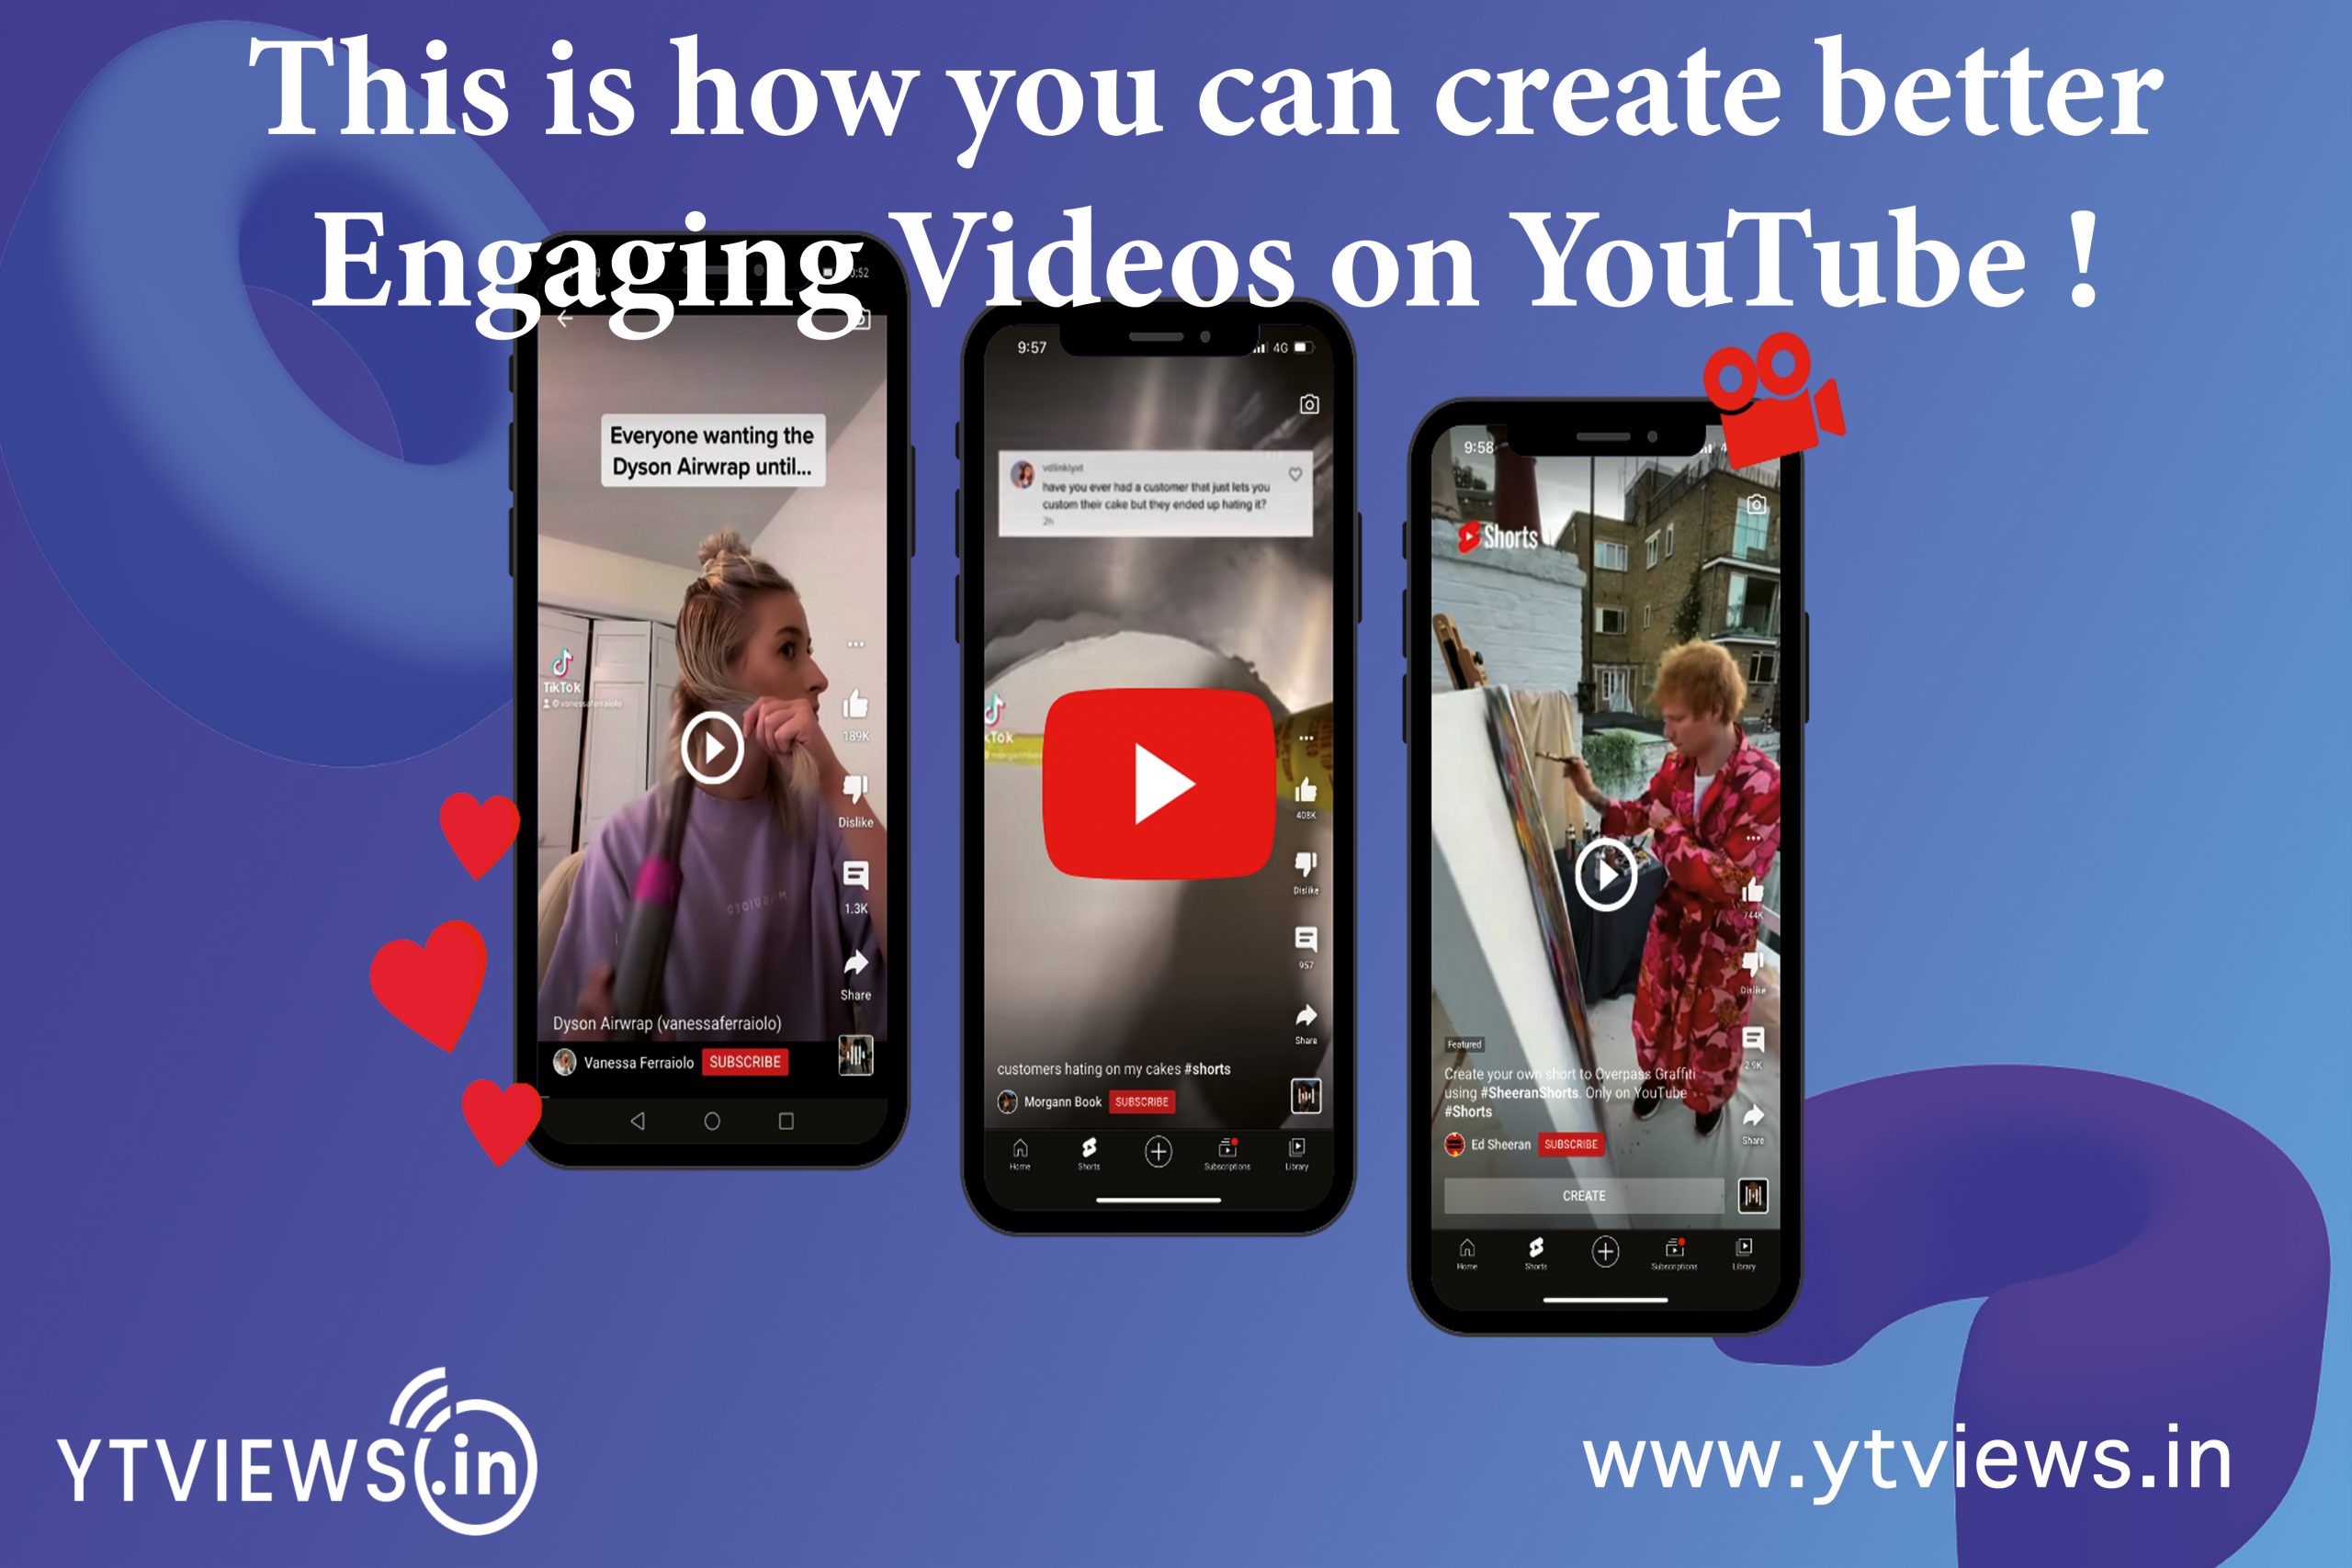 This is how you can create better engaging videos on YouTube.